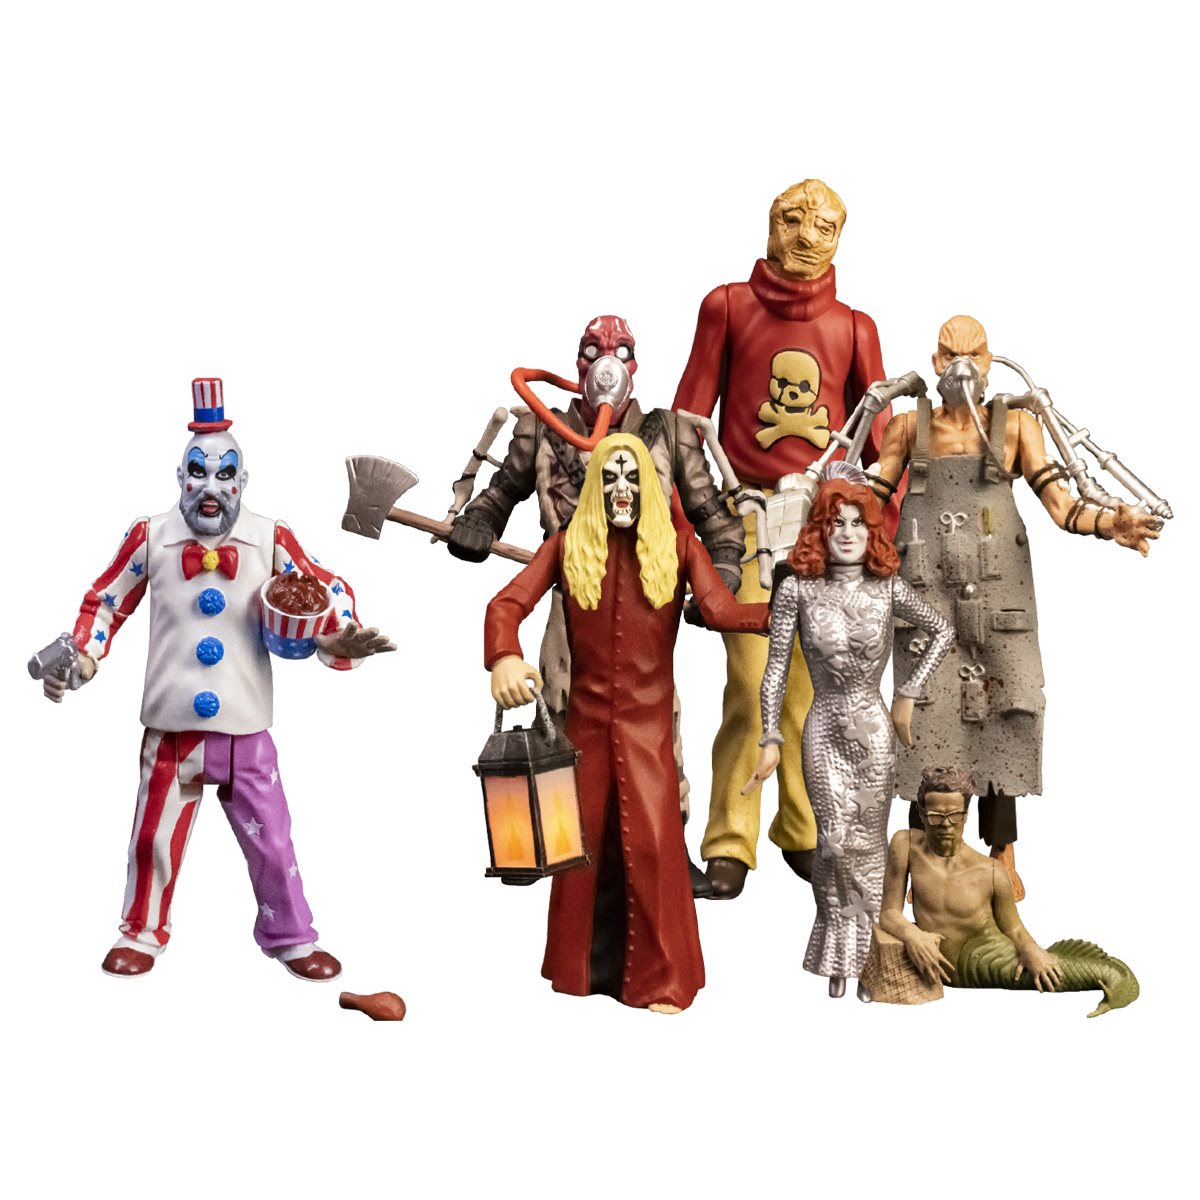 House of 1000 Corpses 5-Inch Action Figure Set of 4 (No Captain Spaulding)